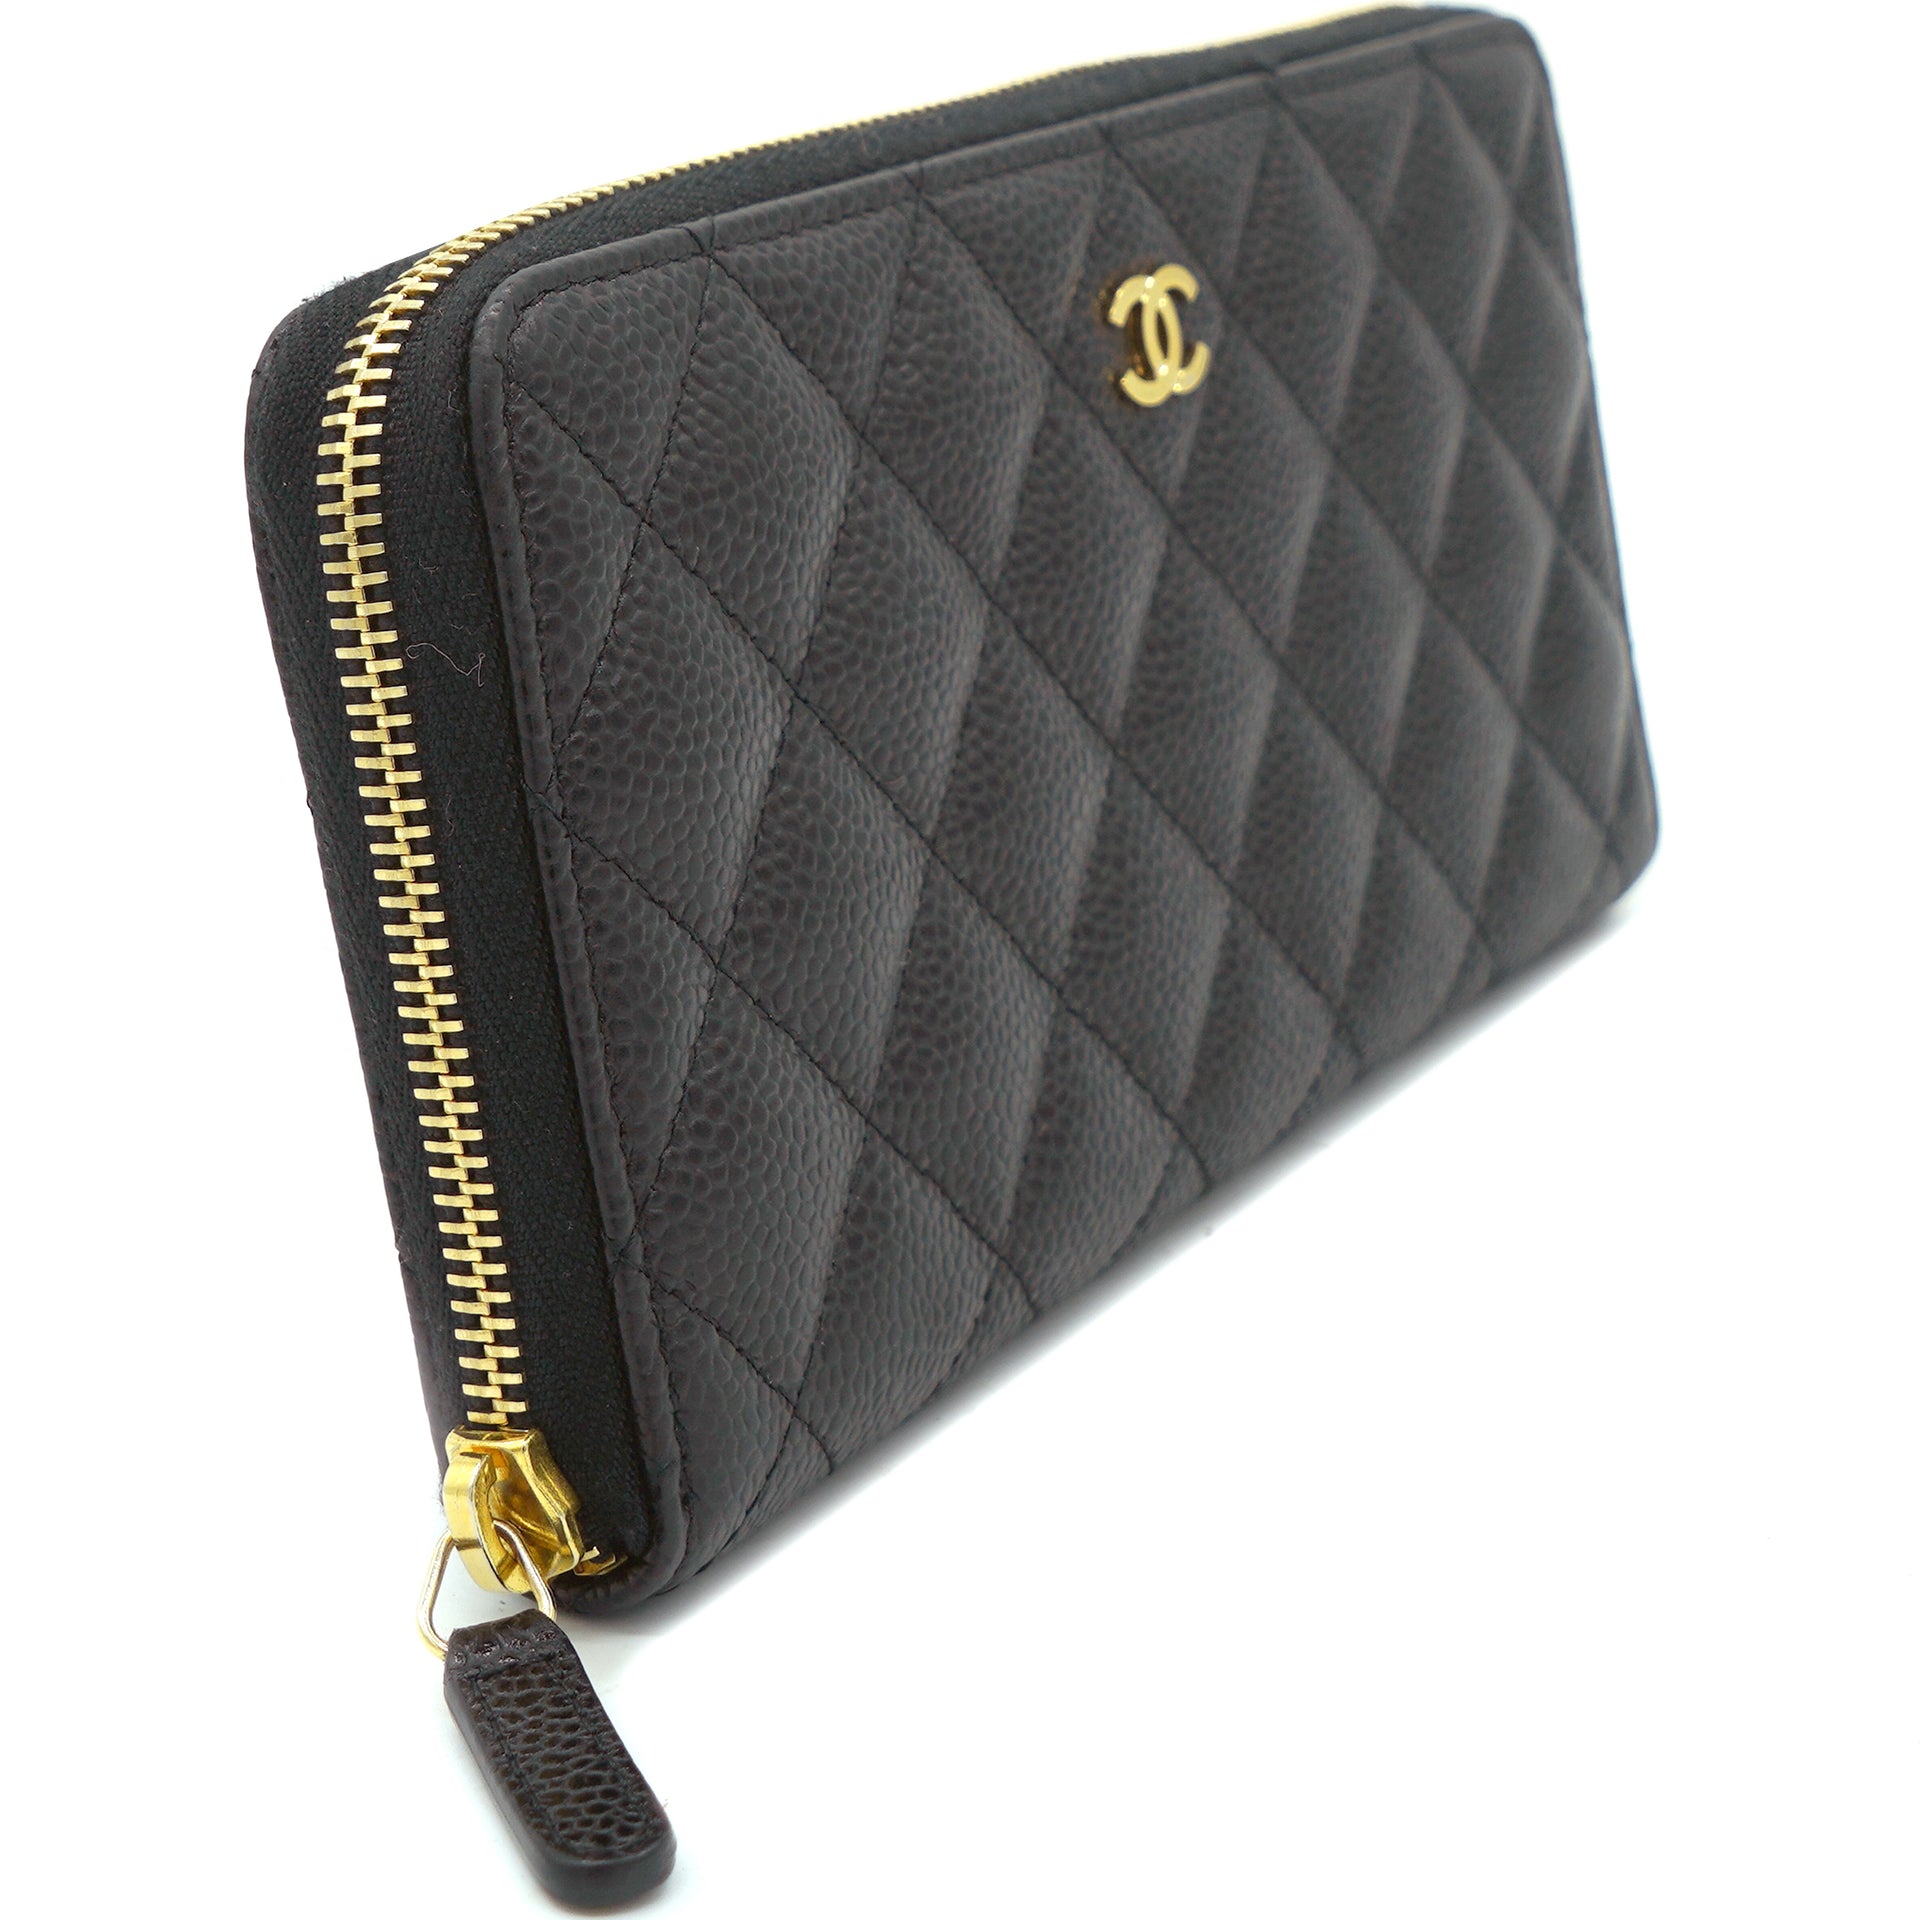 CHANEL A50097 BLACK CAIVAR LEATHER QUILTED ZIP AROUND LONG WALLET